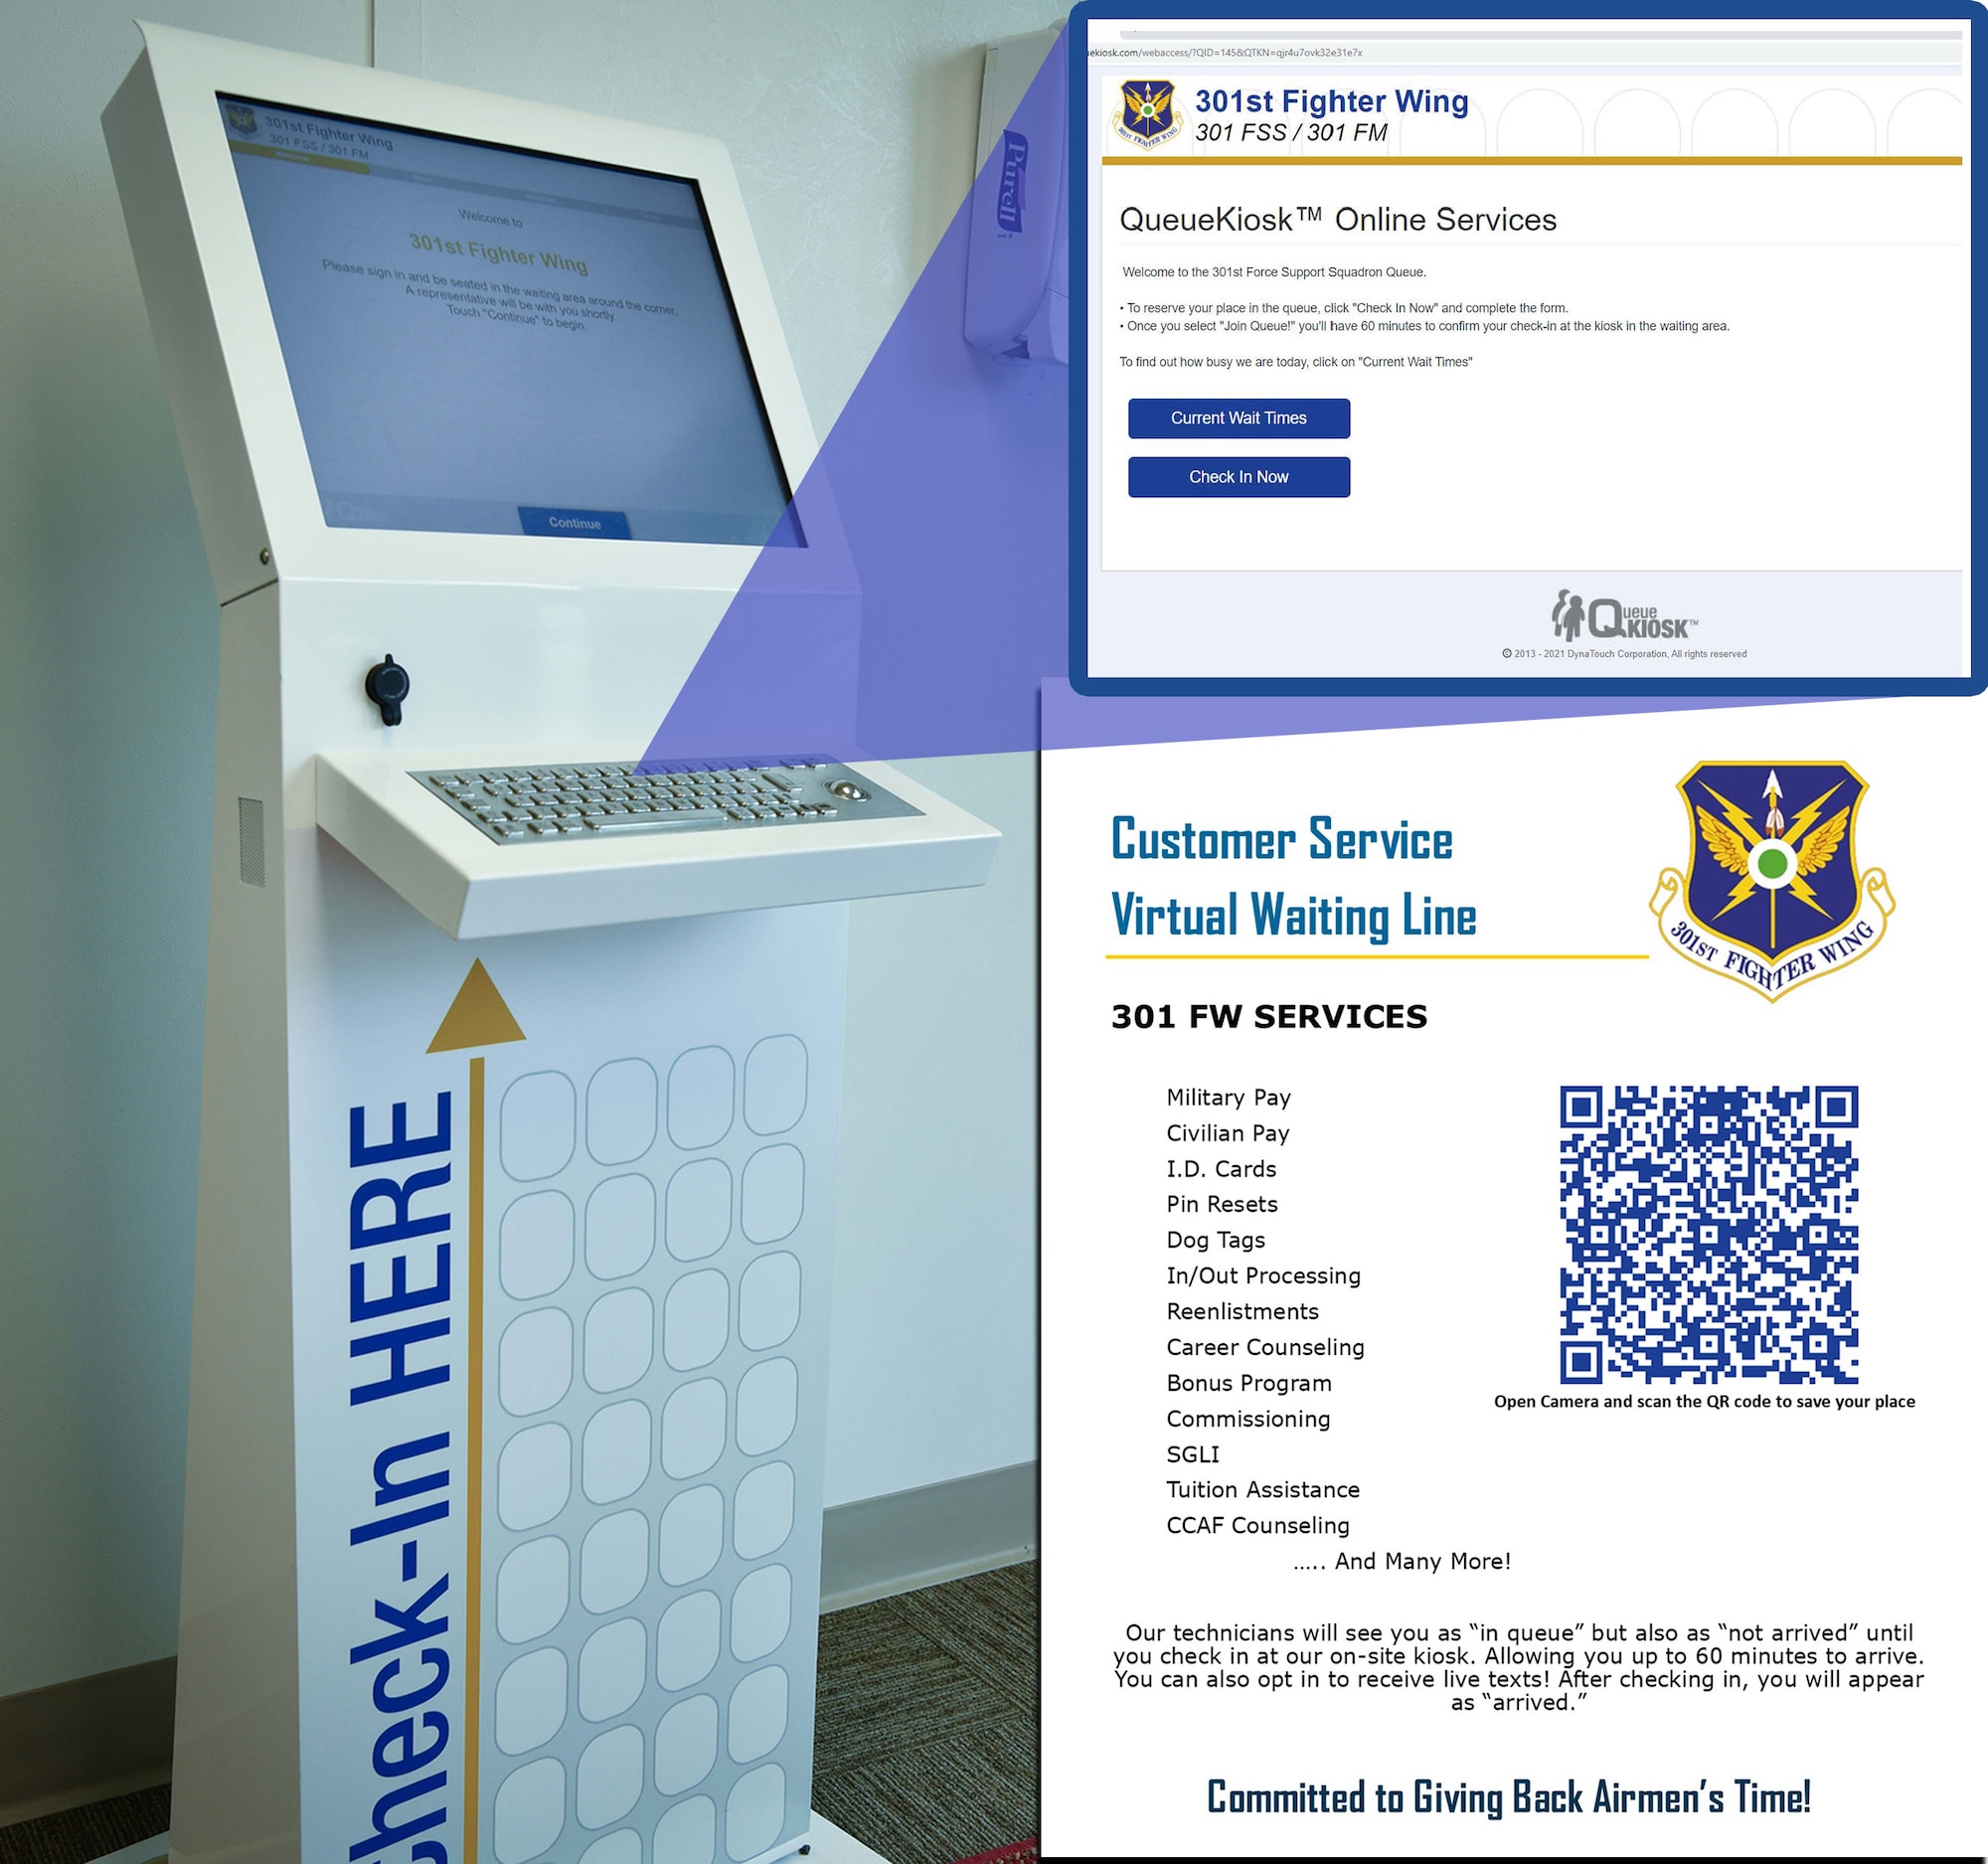 The wing was awarded a customer service-friendly Queue Kiosk system through the 2020 Squadron Innovation Fund and this kiosk is located at the 301st Fighter Wing Force Support Squadron office entrance. This system allows customers to virtually sign-in using QR codes via their cell phone at their respective squadrons or sign-up via a web link in order to use their time more efficiently as well as see the waiting list in real-time. (U.S. Air Force graphic by Jeremy Roman)